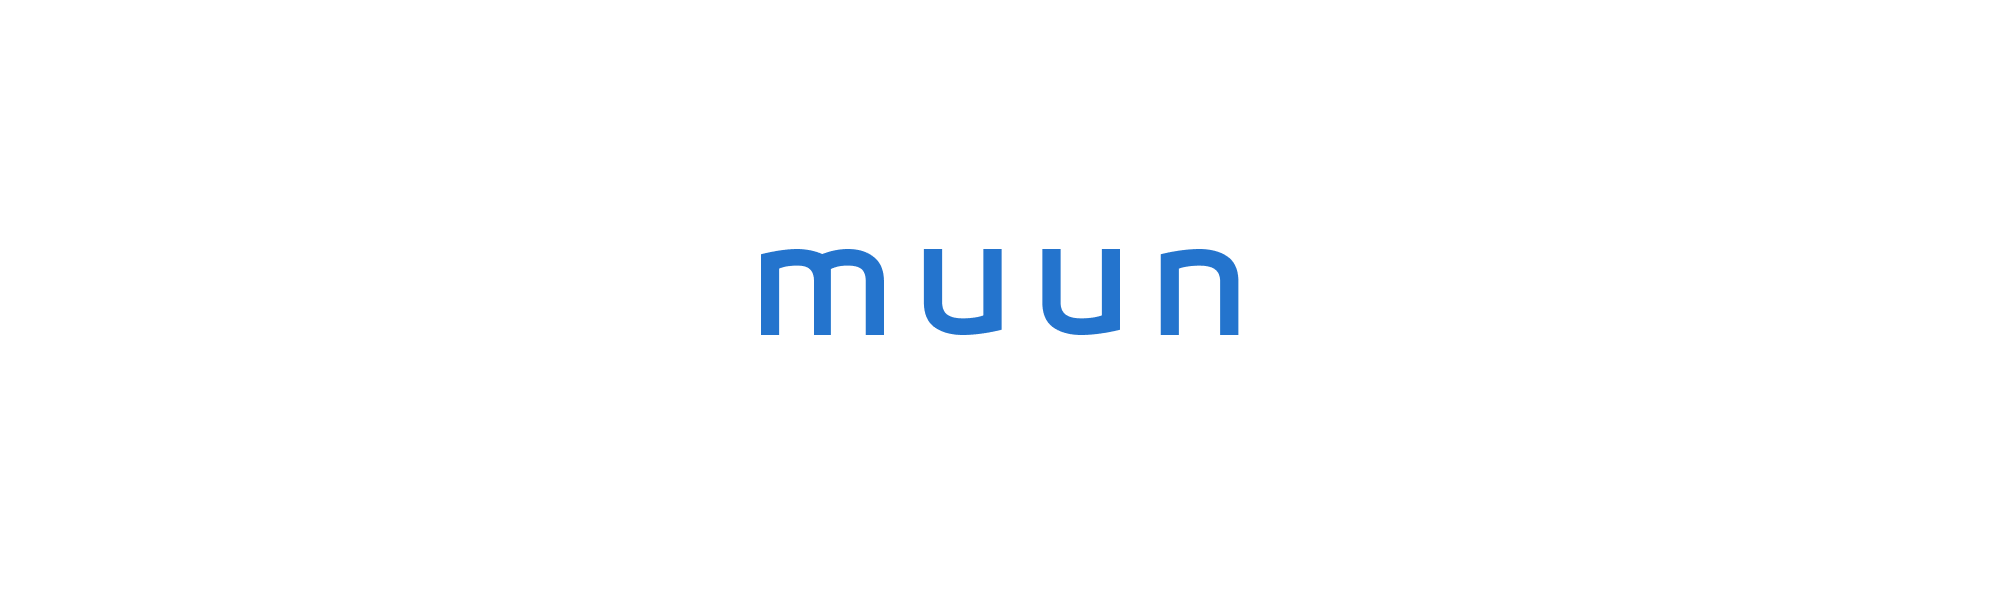 Muun Wallet v2.7.5: Improved Reliability, Unified QR